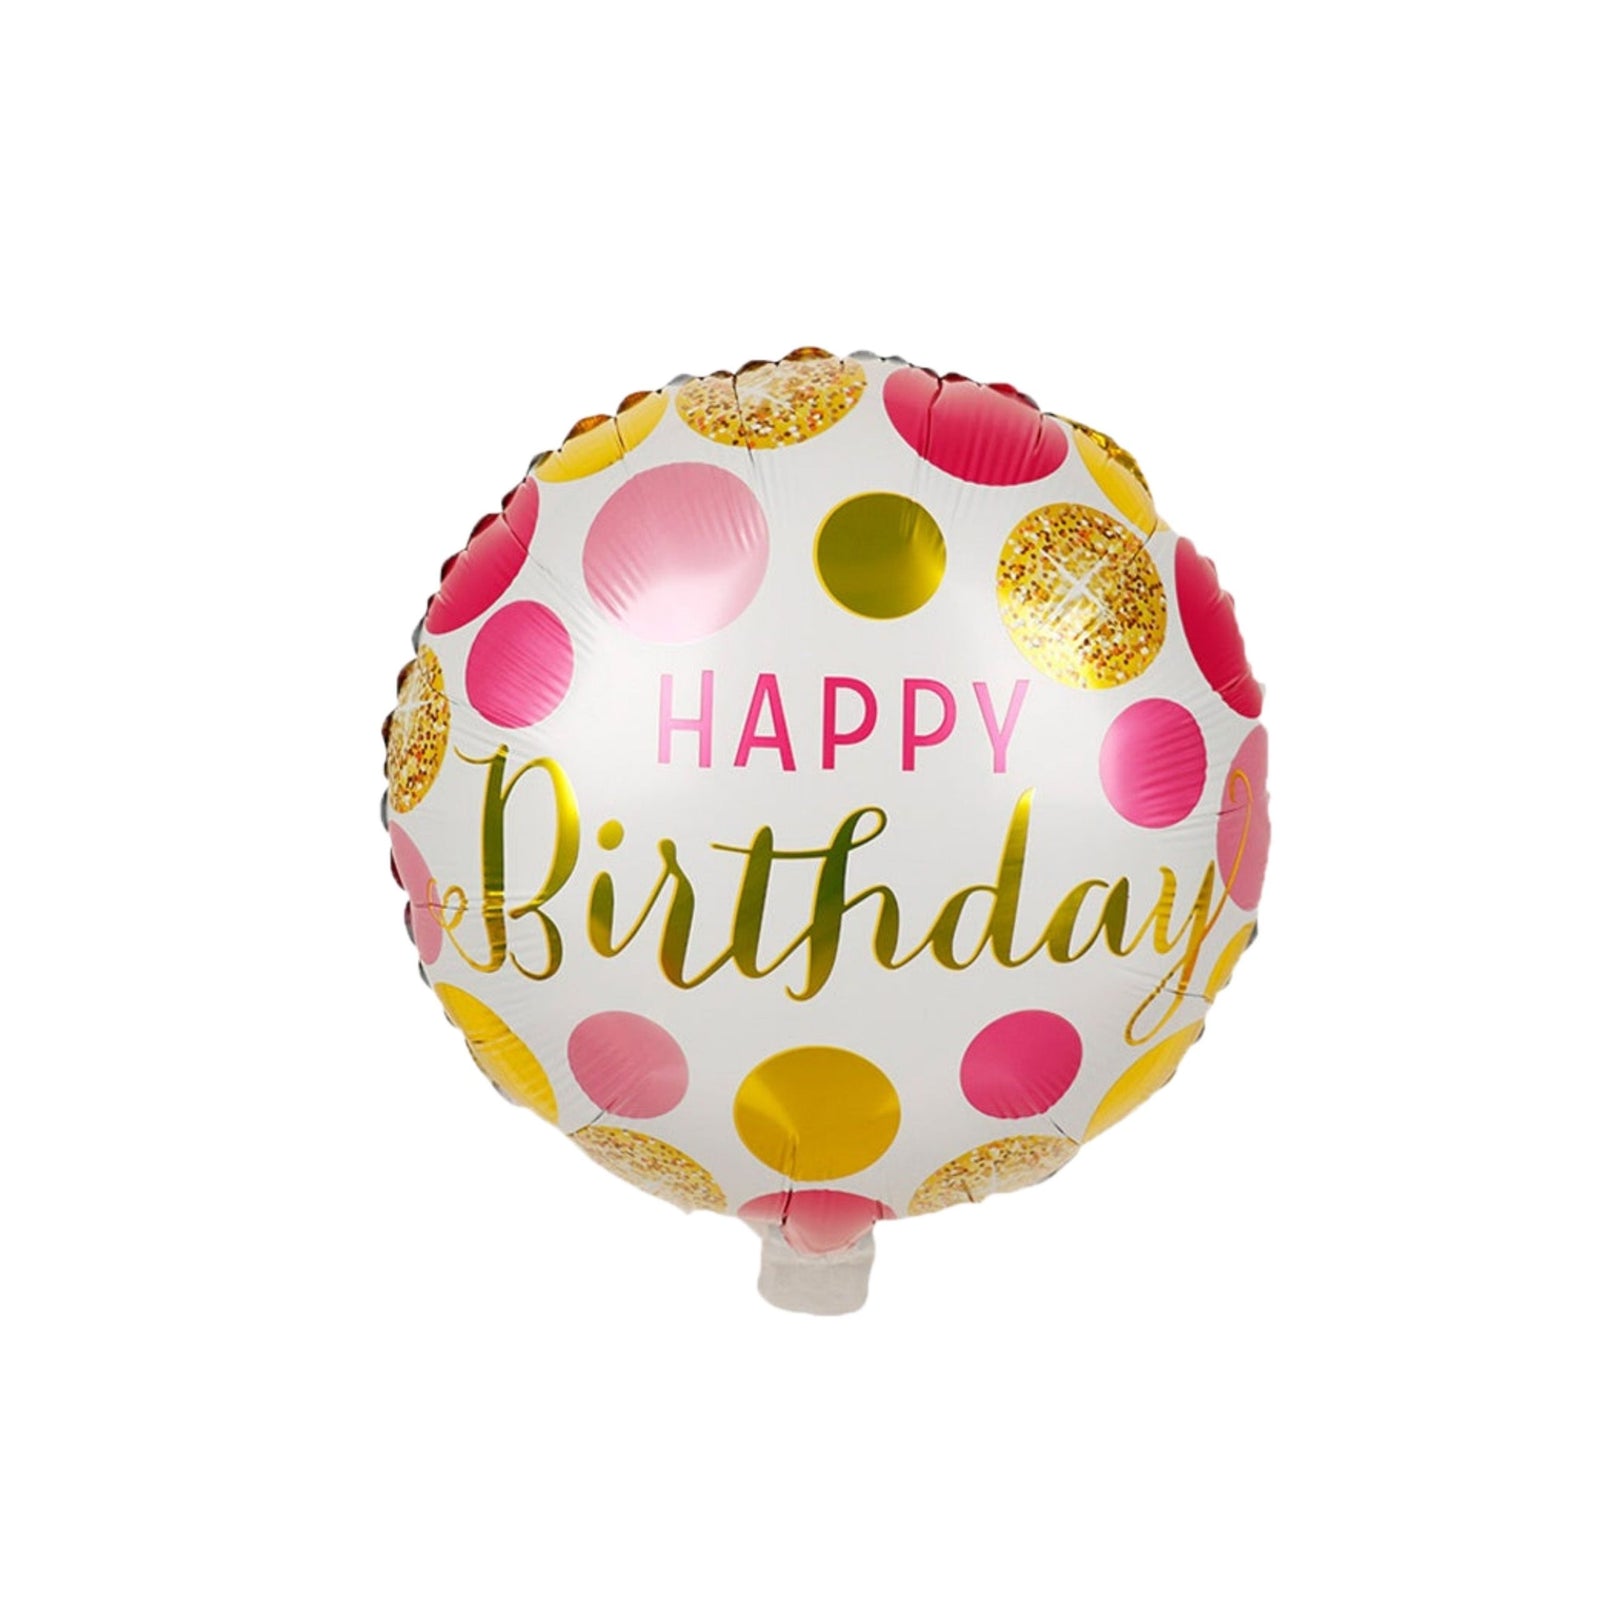 Party Decor Mall – Printed Round Shape Cake Happy Birthday Foil Balloon